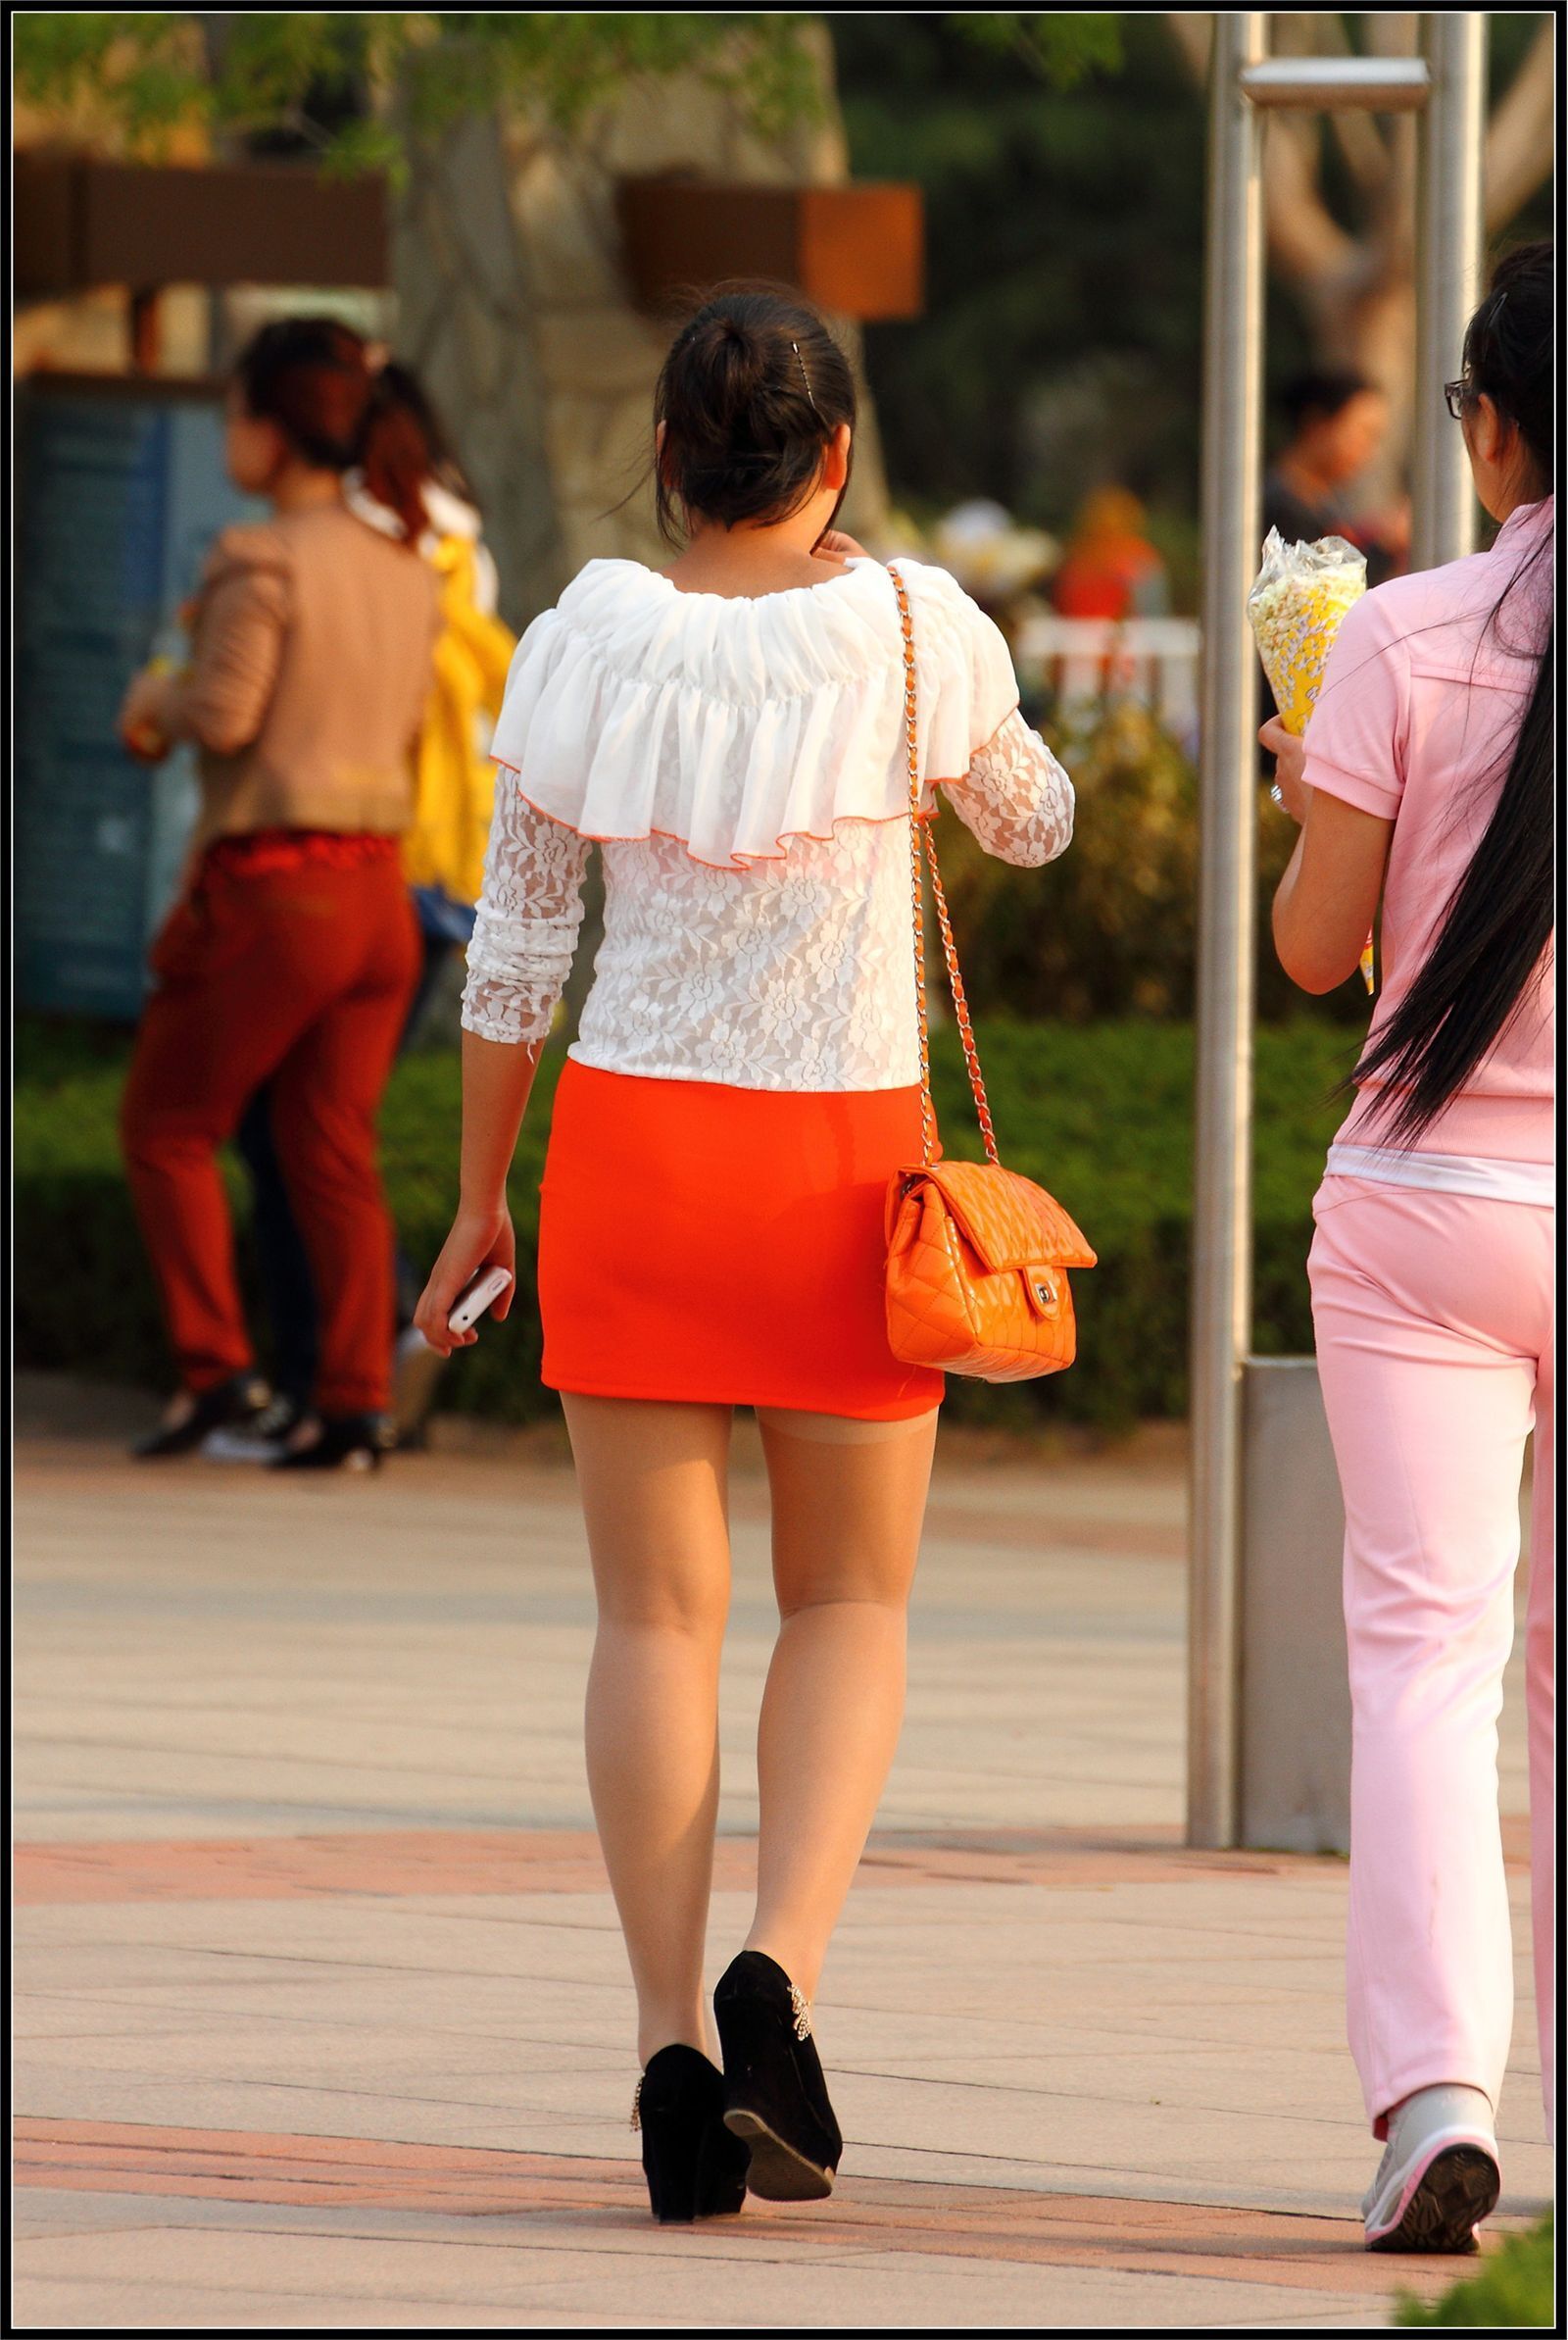 [outdoor Street Photo] 2013.09.25 orange and white dresses are so charming